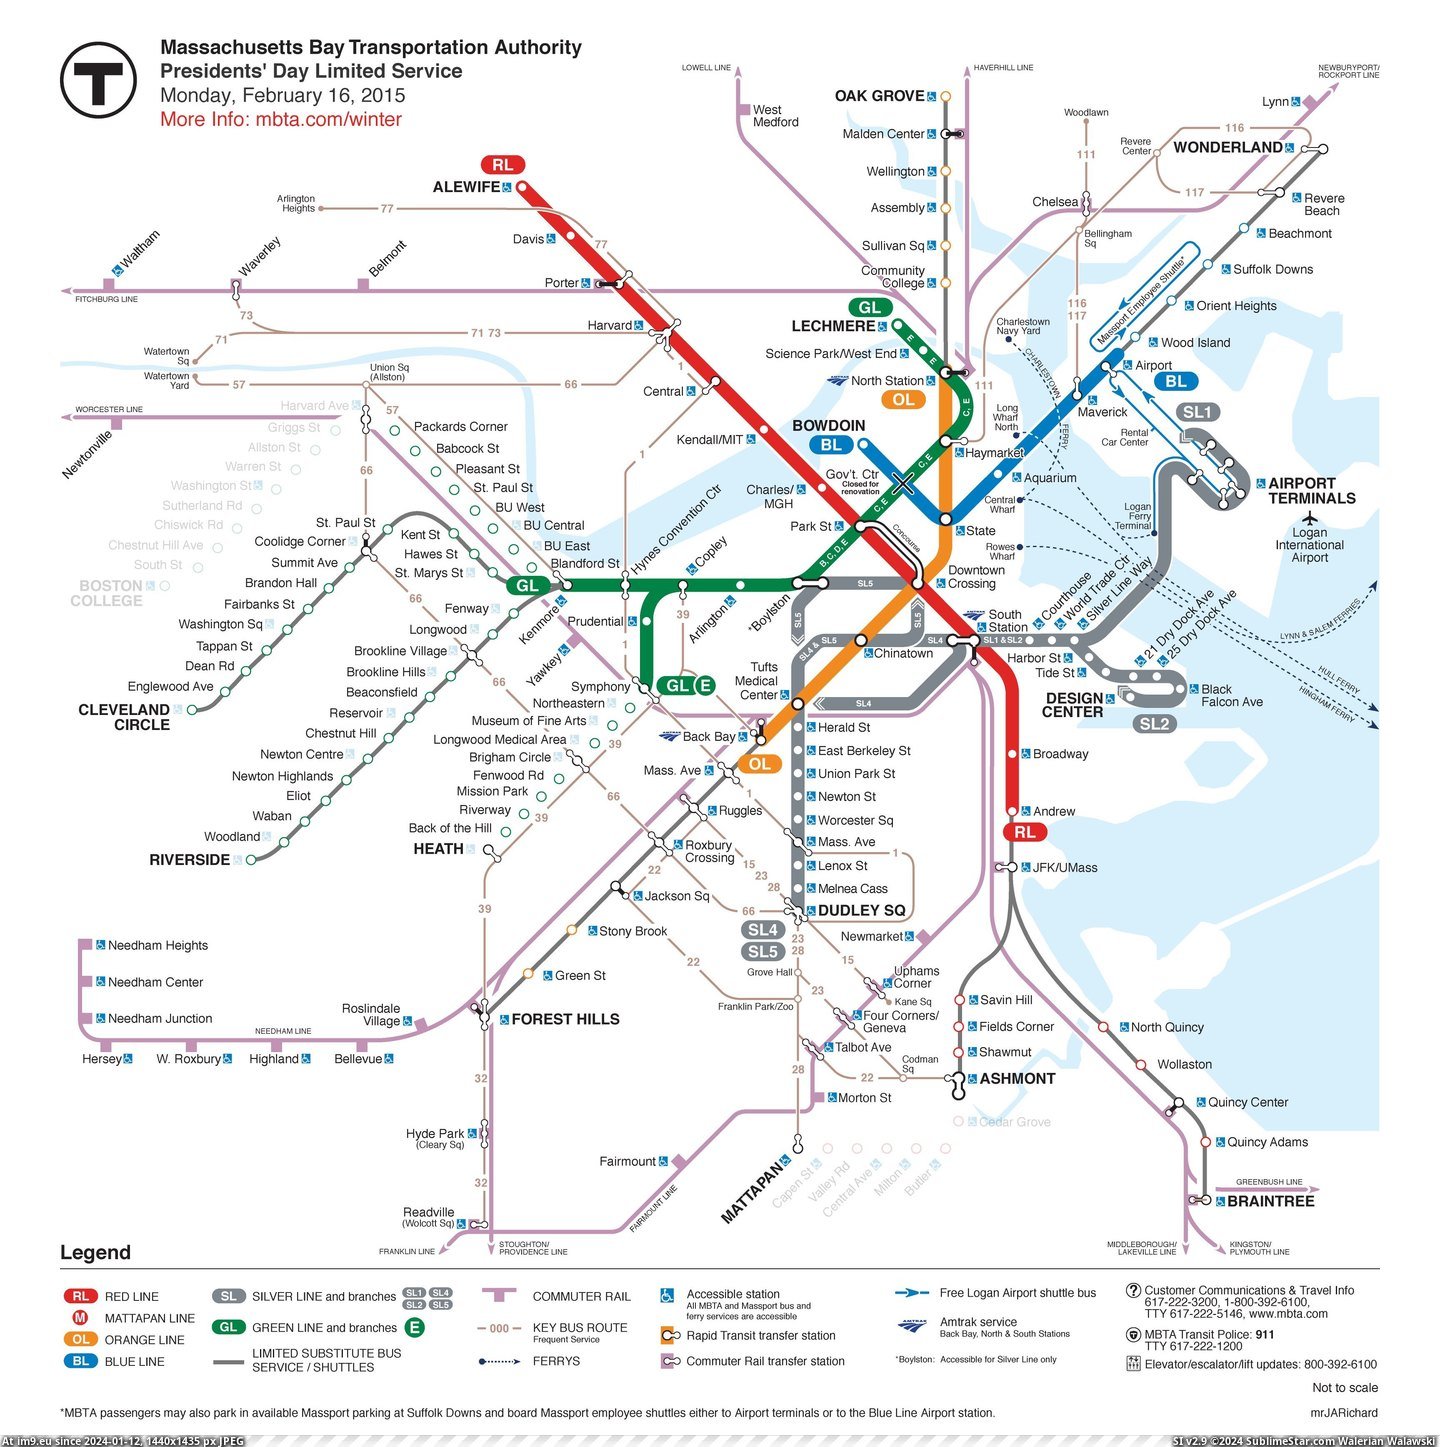 #Update #Map #Showing #Boston #Transit #Snow #Service #Current [Mapporn] Boston's MBTA transit map: update showing current service after nearly 2.4 meters of snow in 22 days [3456x3456] Pic. (Image of album My r/MAPS favs))